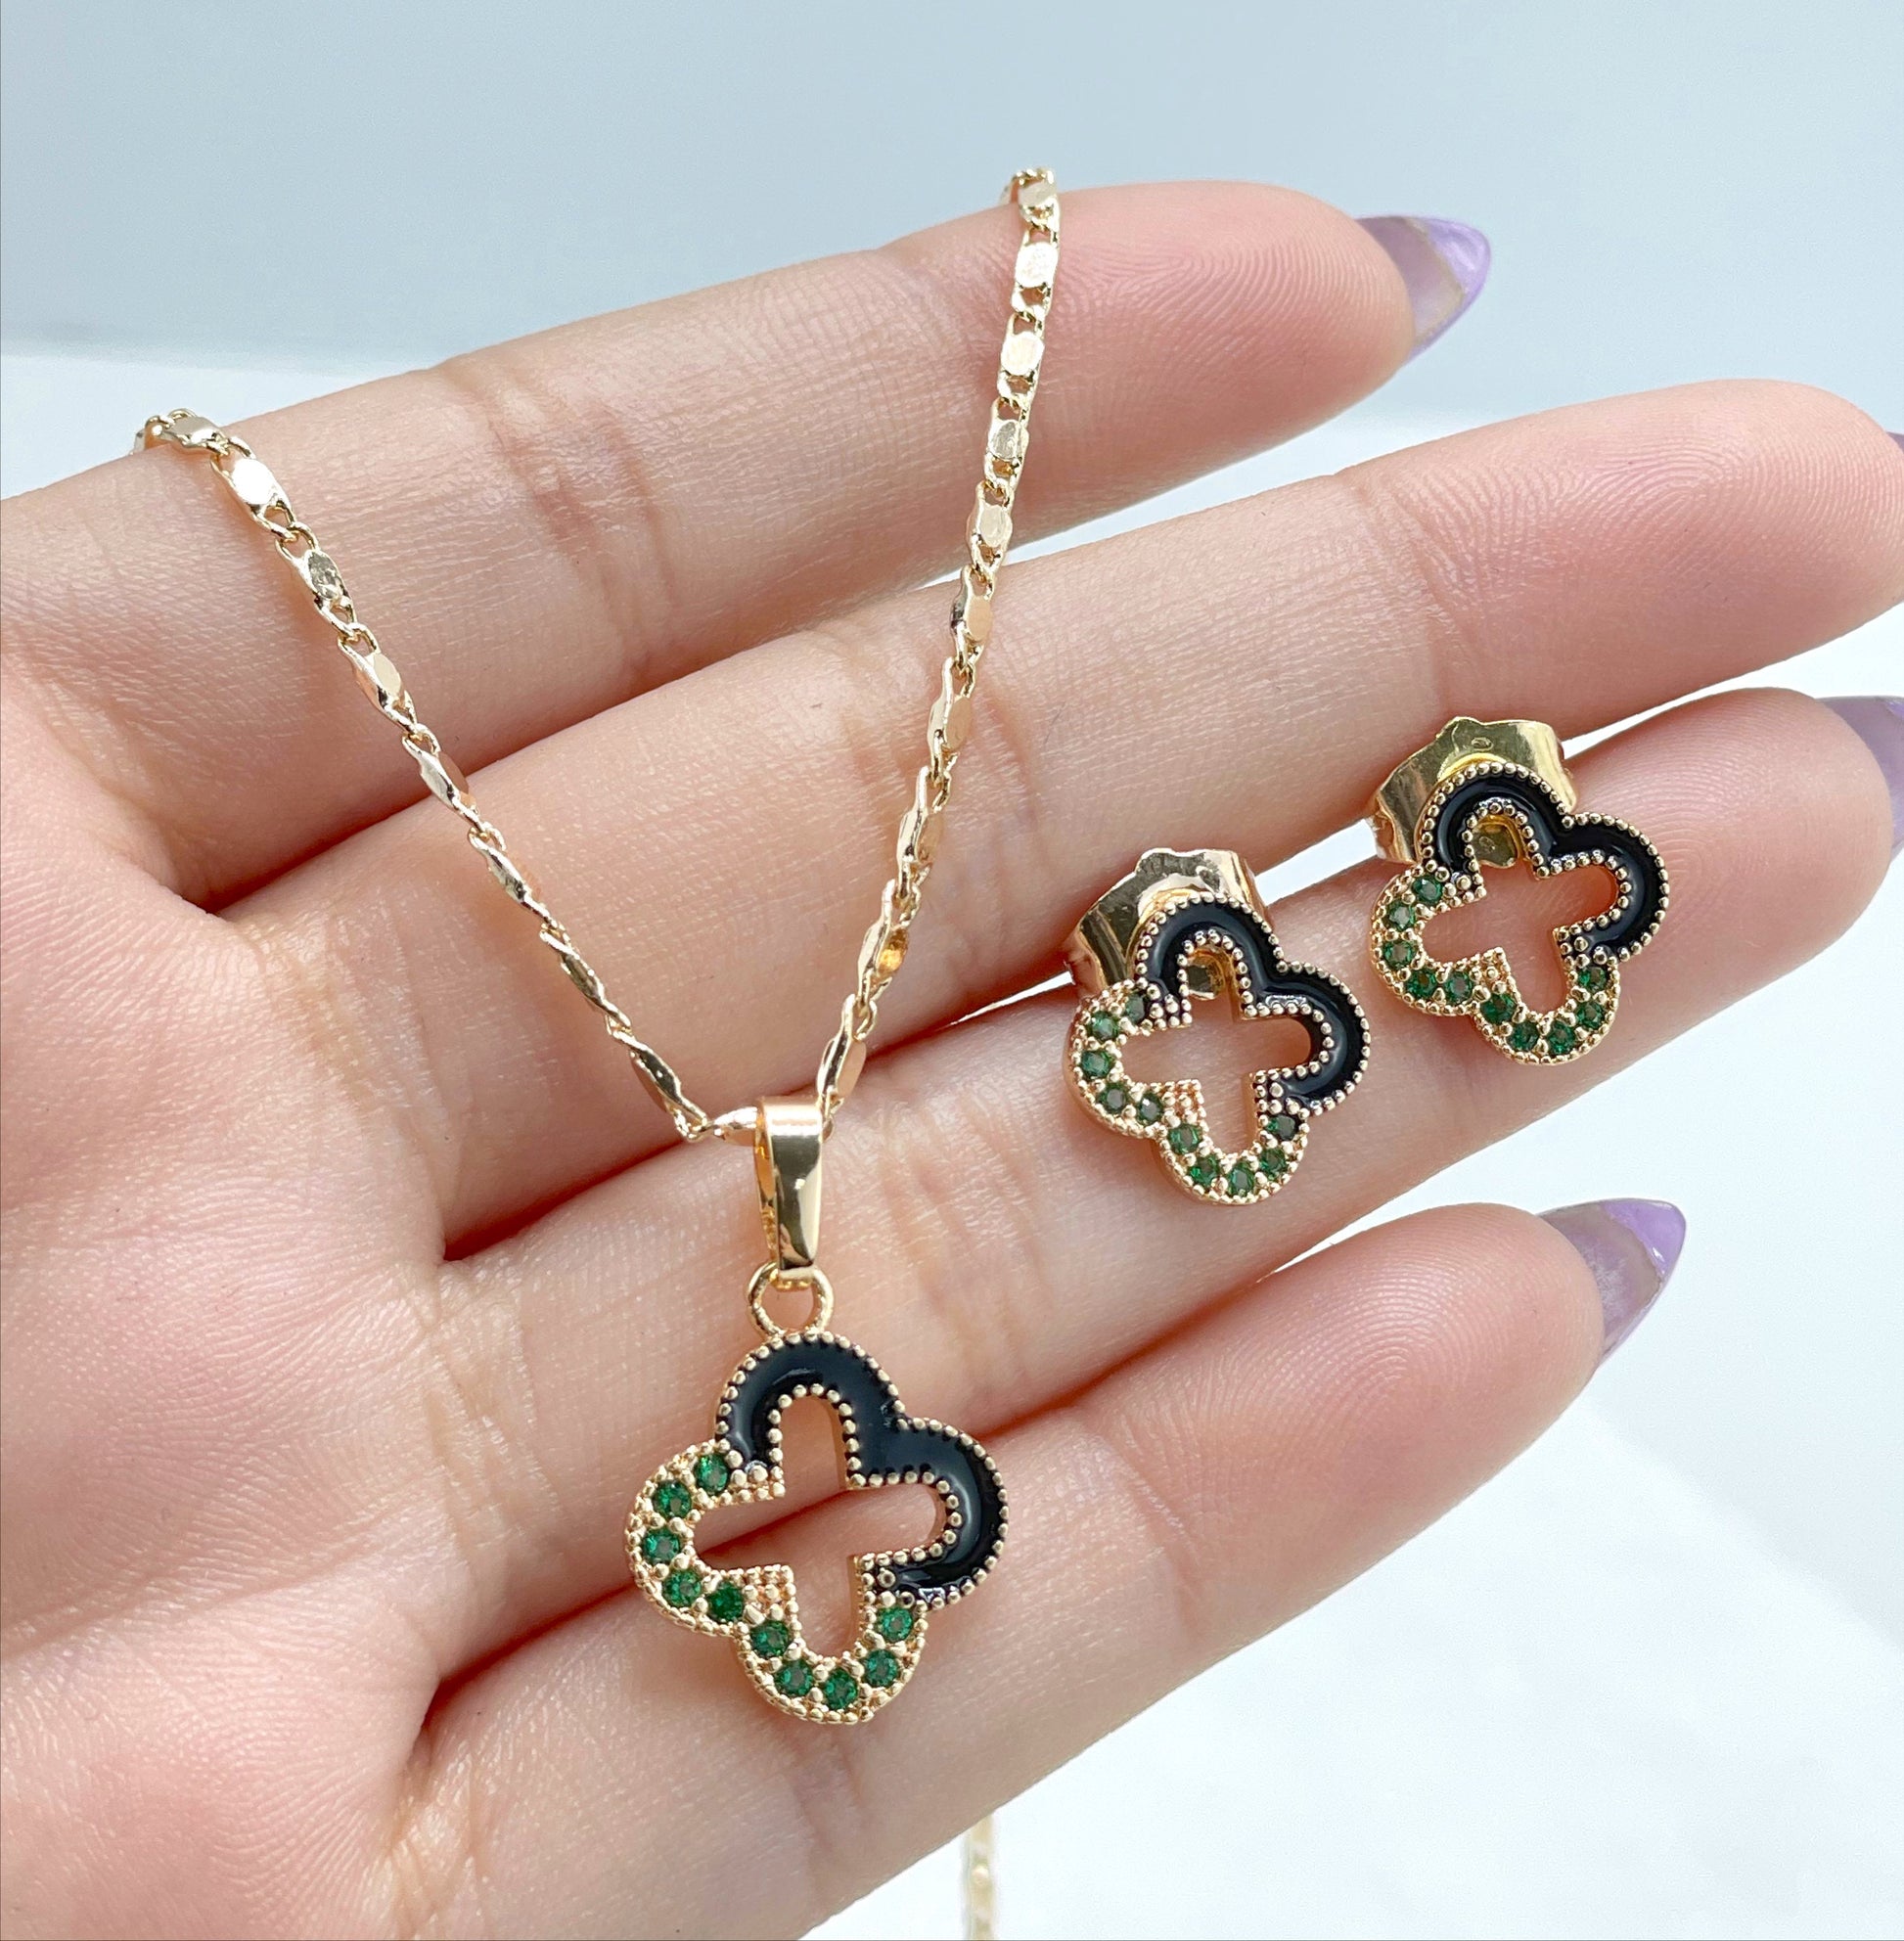 18k Gold Filled with Green Micro Cubic, Black, 1.5mm Mariner Link Chain, 25mm Clover Necklace or Earrings Set Wholesale Jewelry Supplies